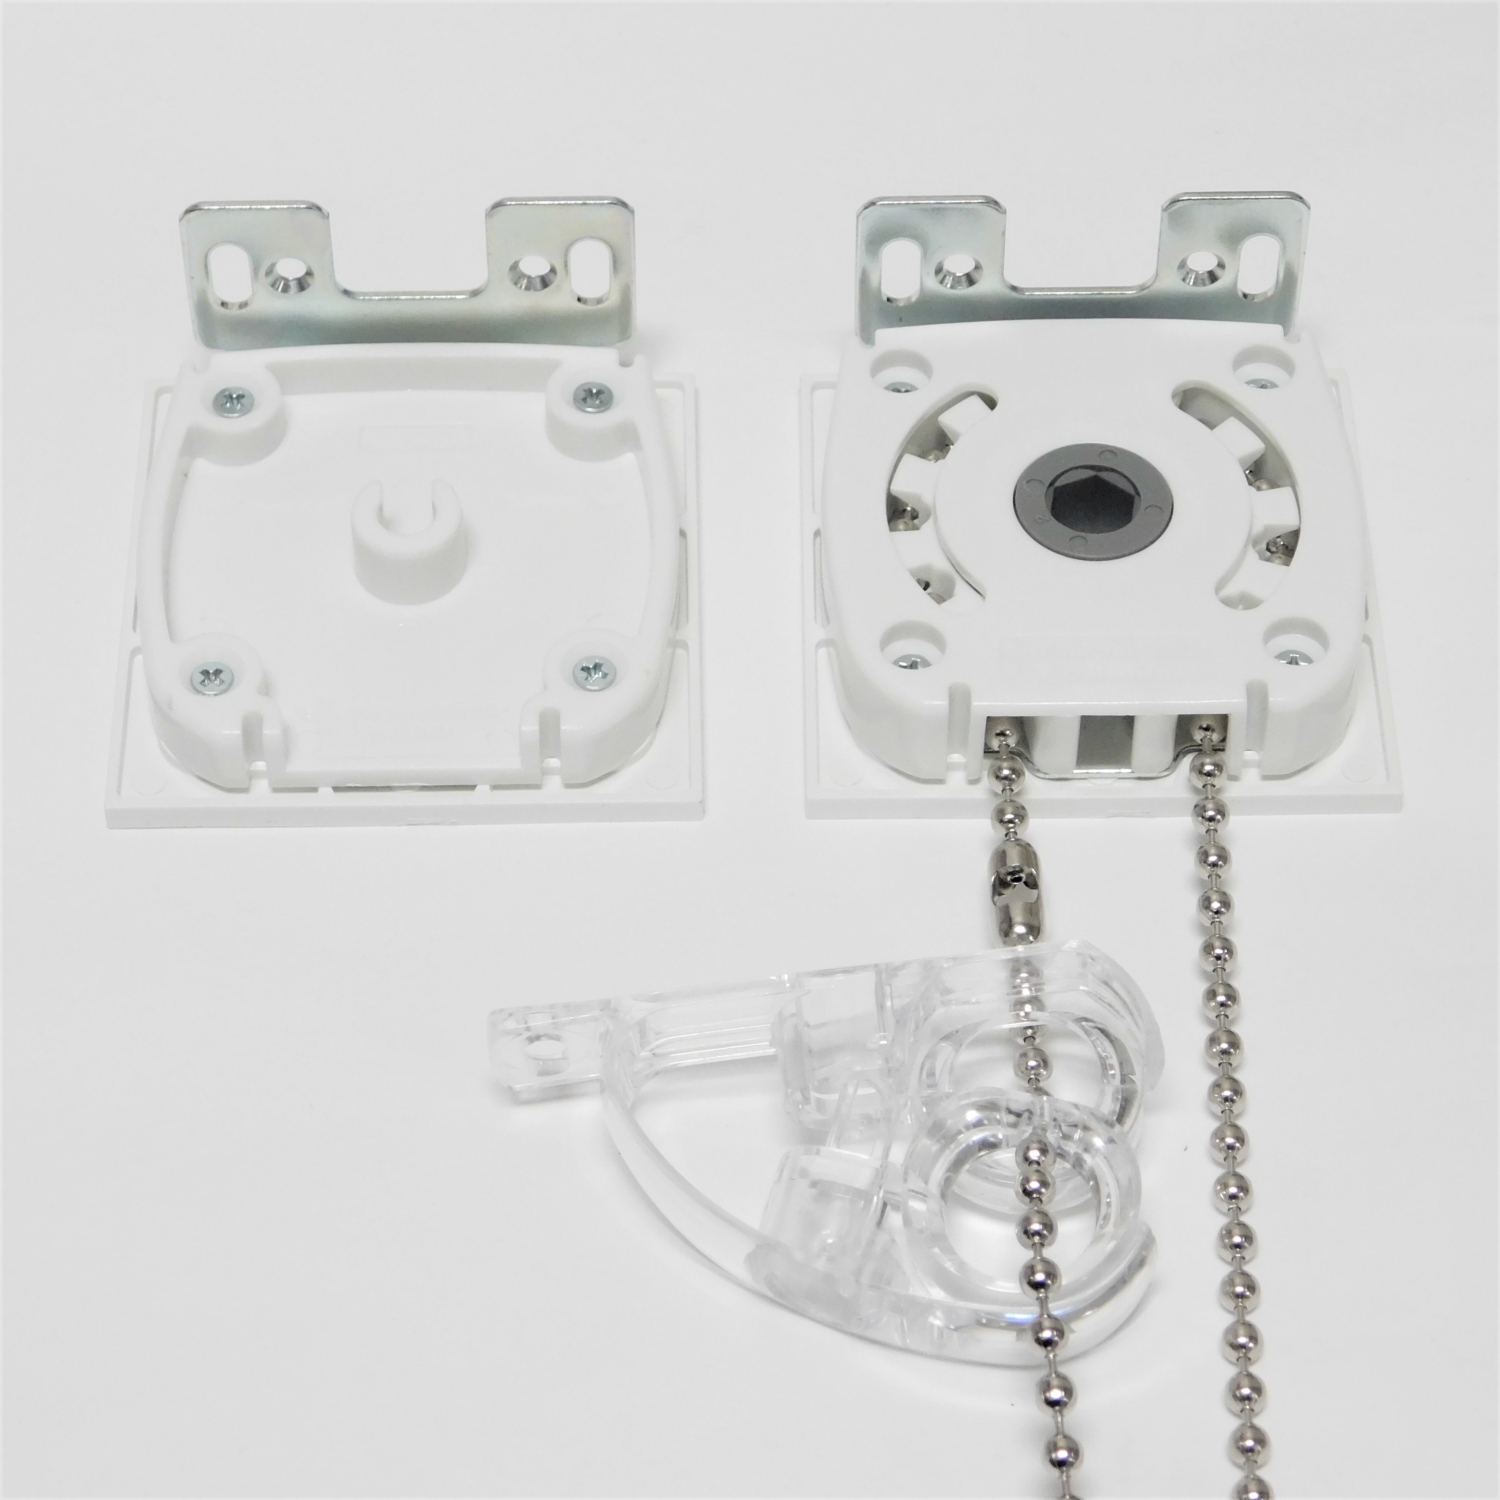 2x White 2638 Roller Blind Shade Clutch Bracket Parts Kits For 38mm Dia Aluminum